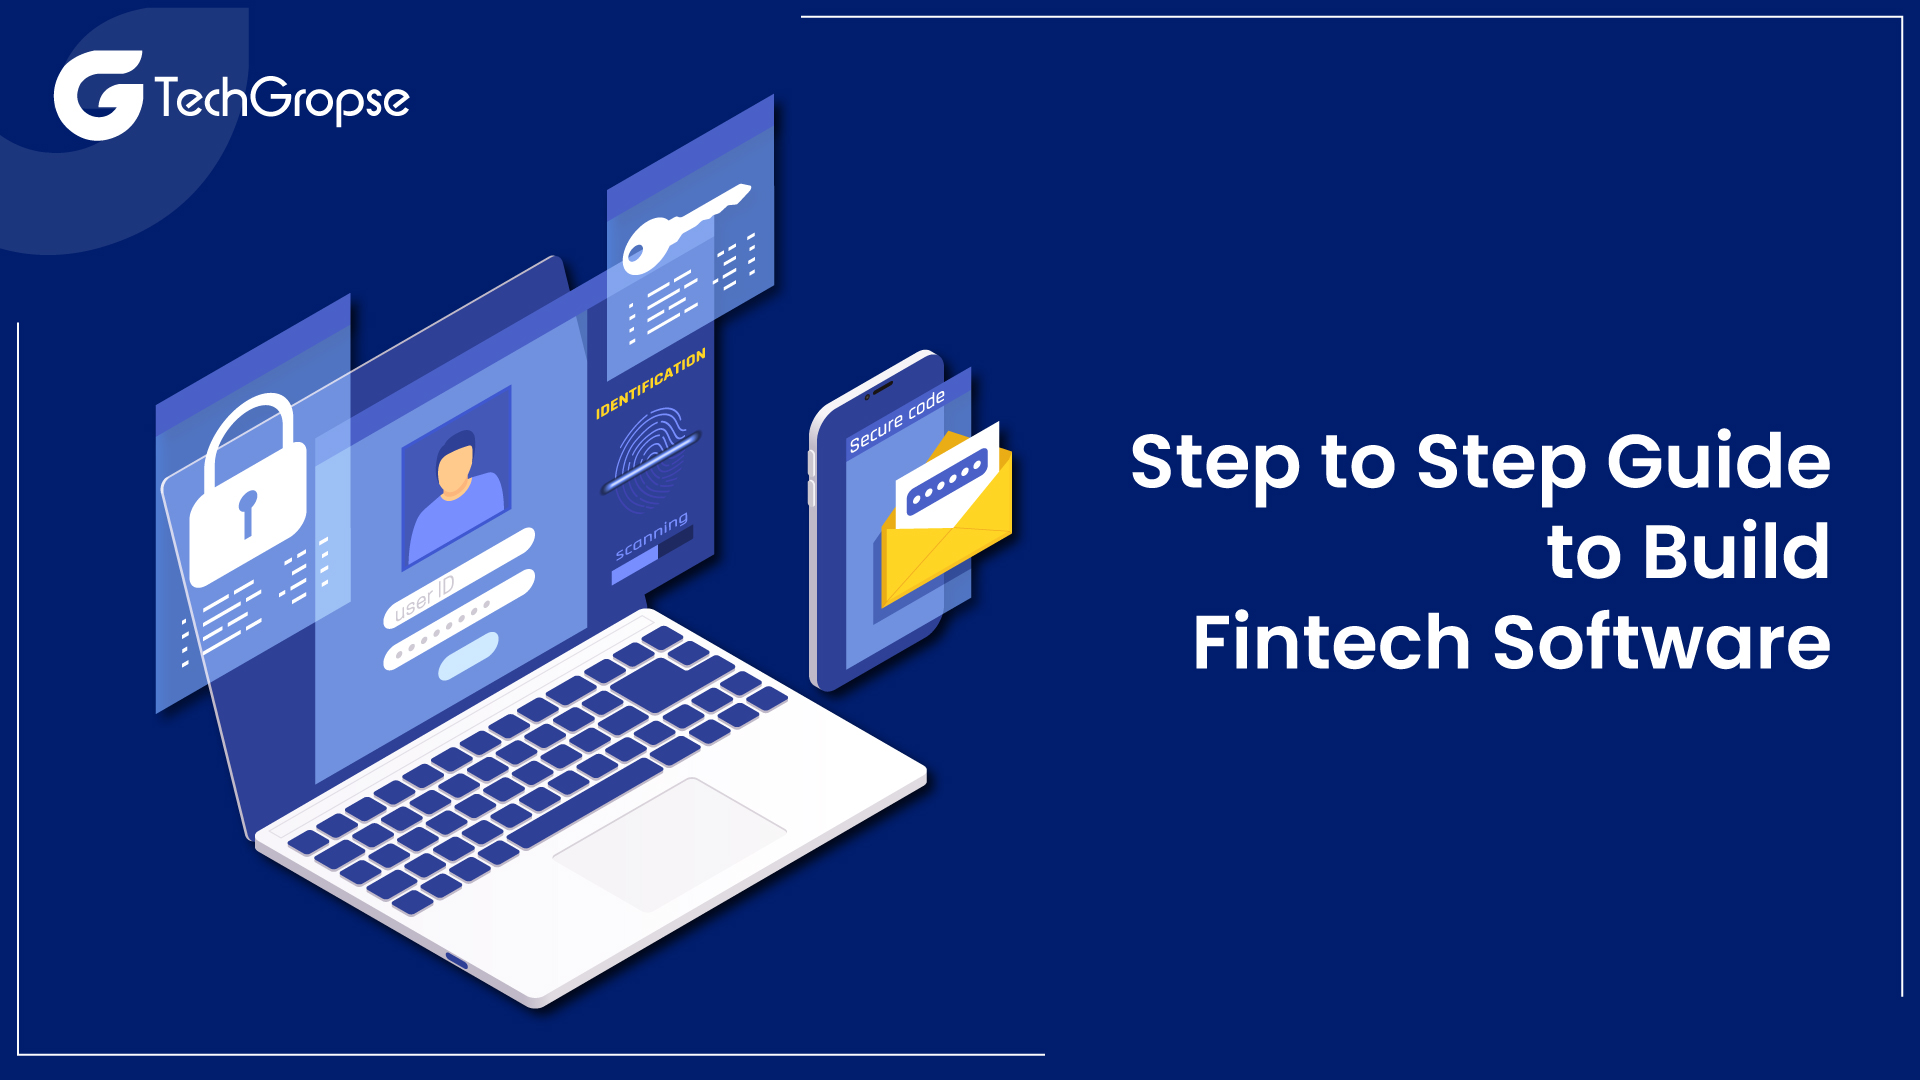 Step to Step Guide to Build Fintech Software 